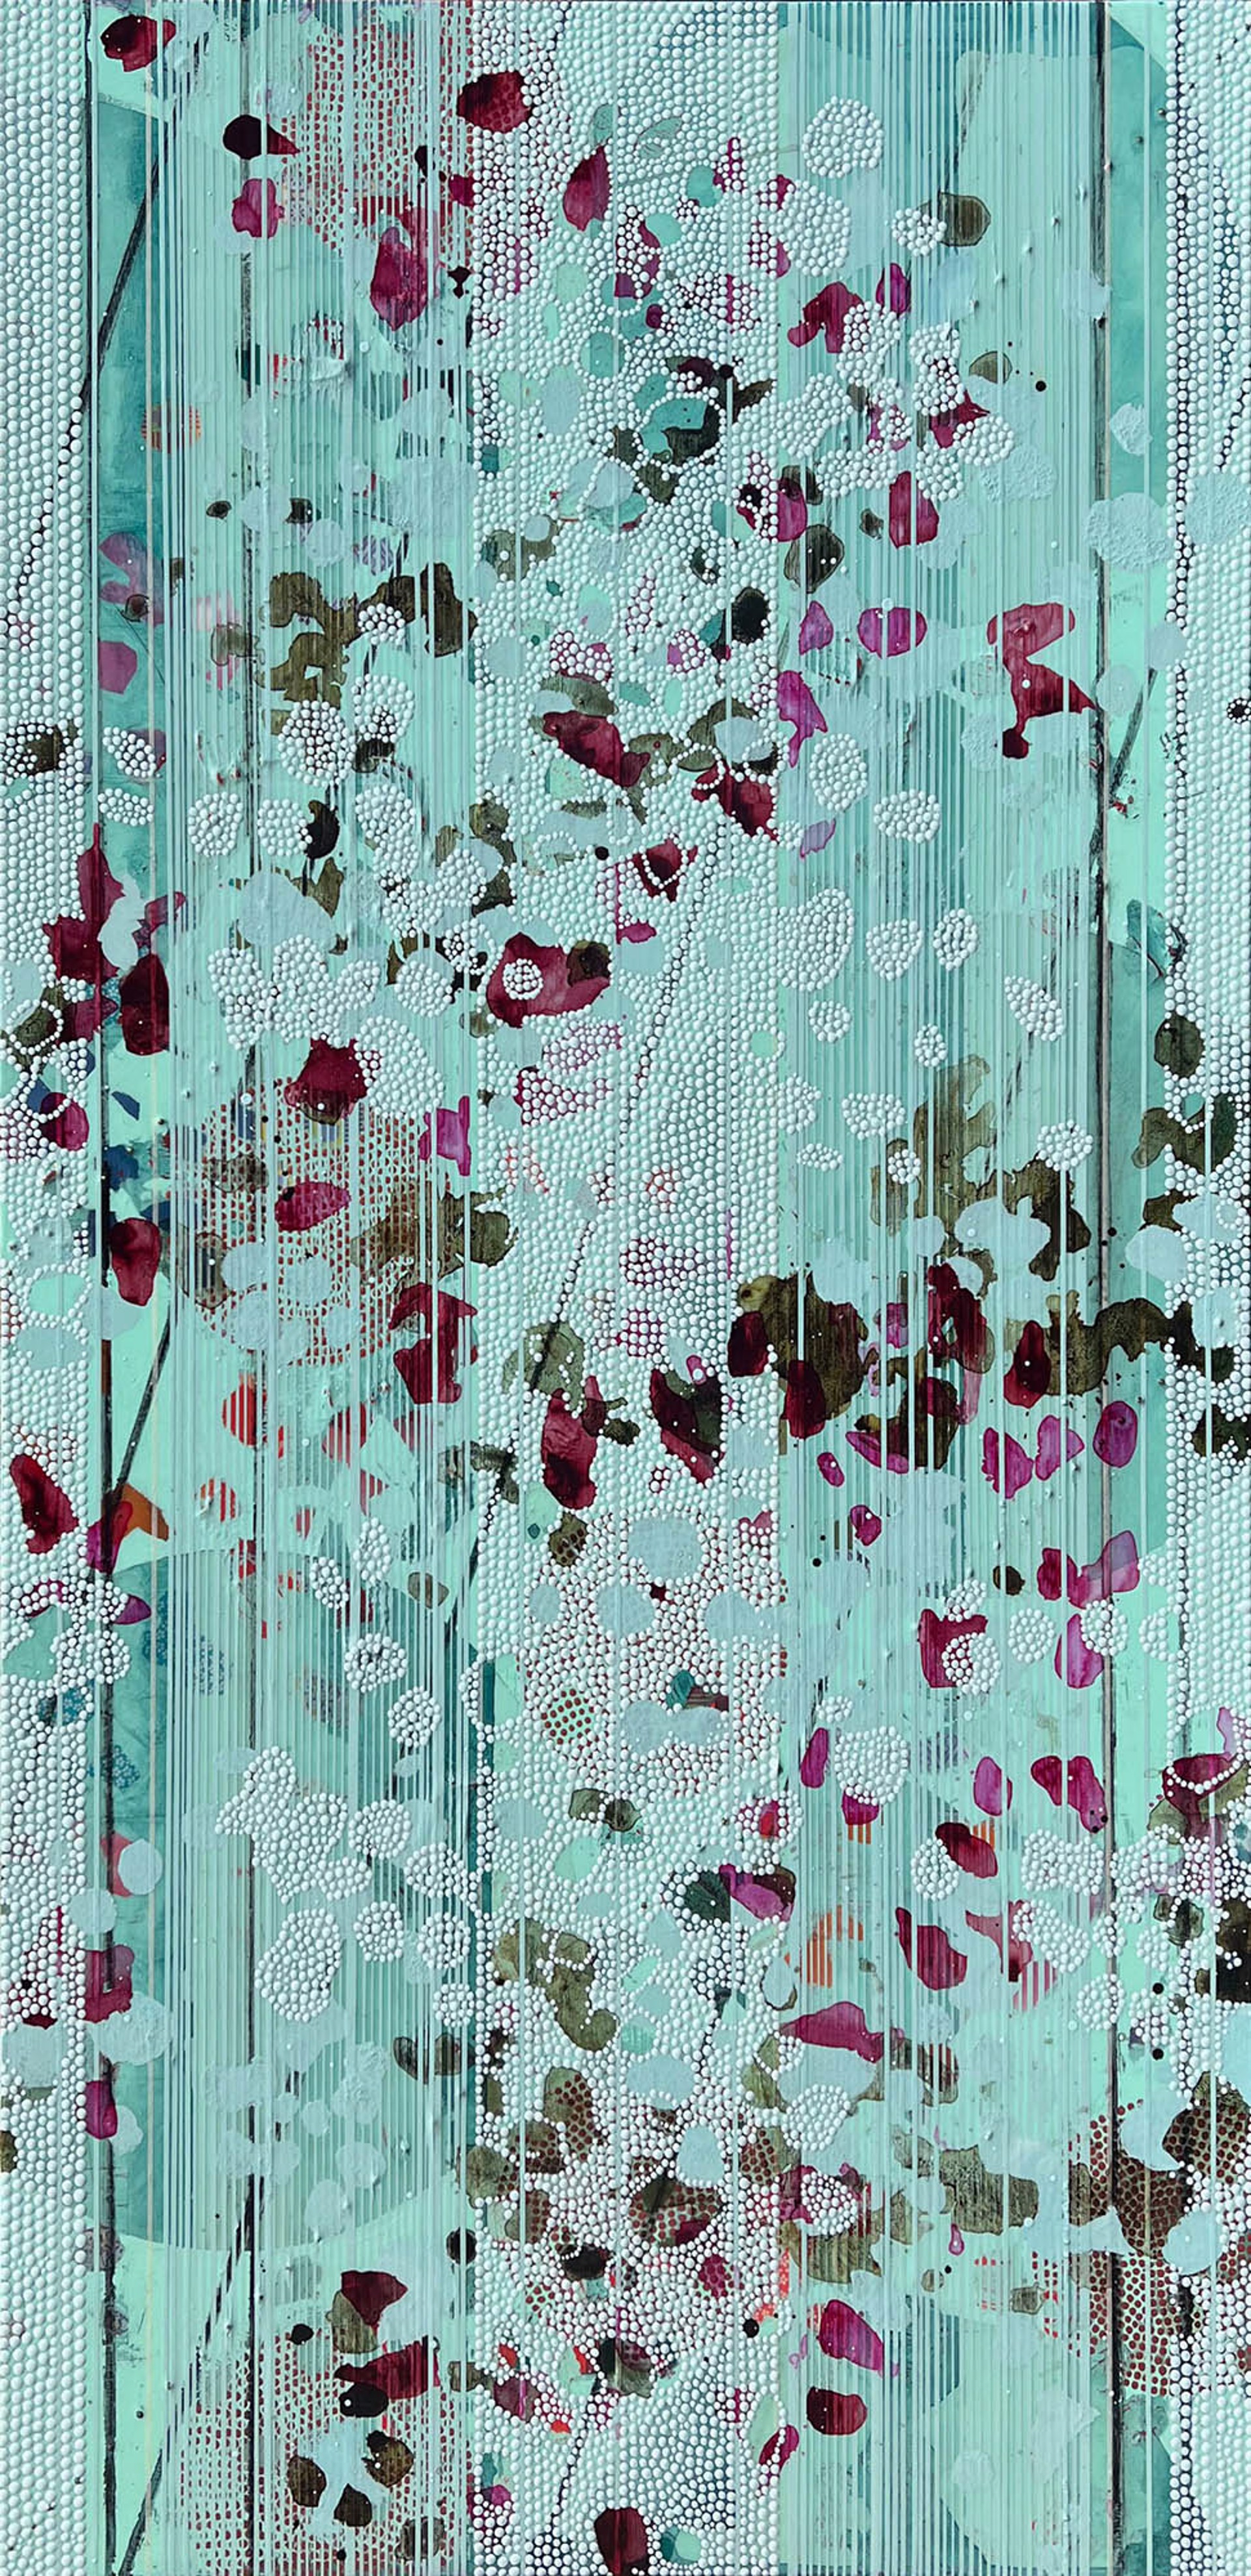 Original Mixed Media Abstract Painting Featuring Botanical Motifs Circular Overlays And A Blue Textured Background